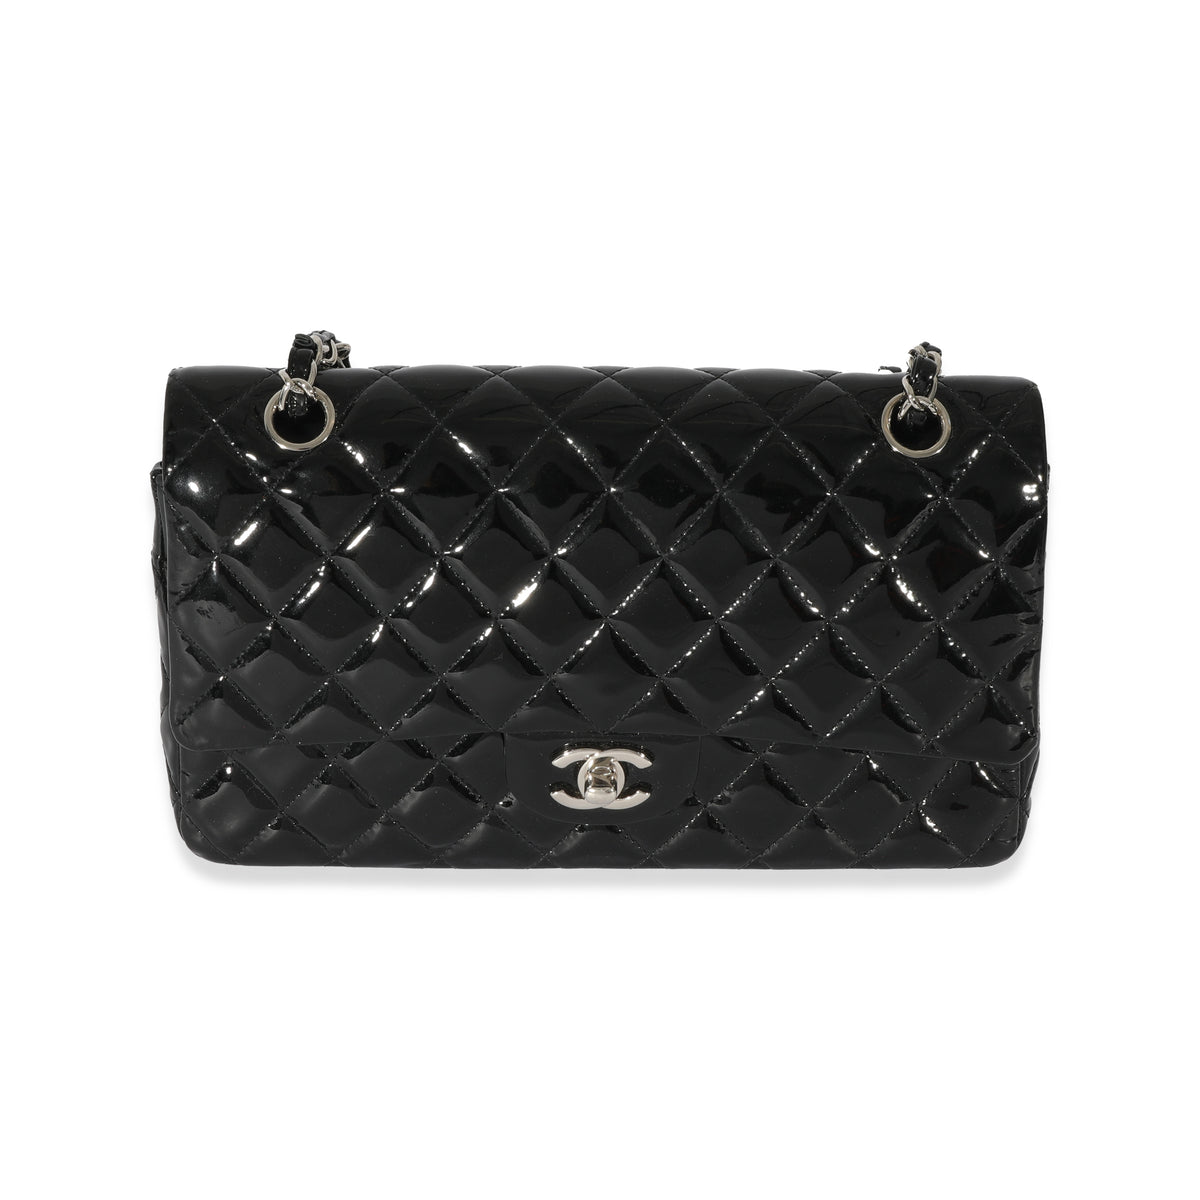 Black Quilted Patent Leather Medium Classic Double Flap Bag